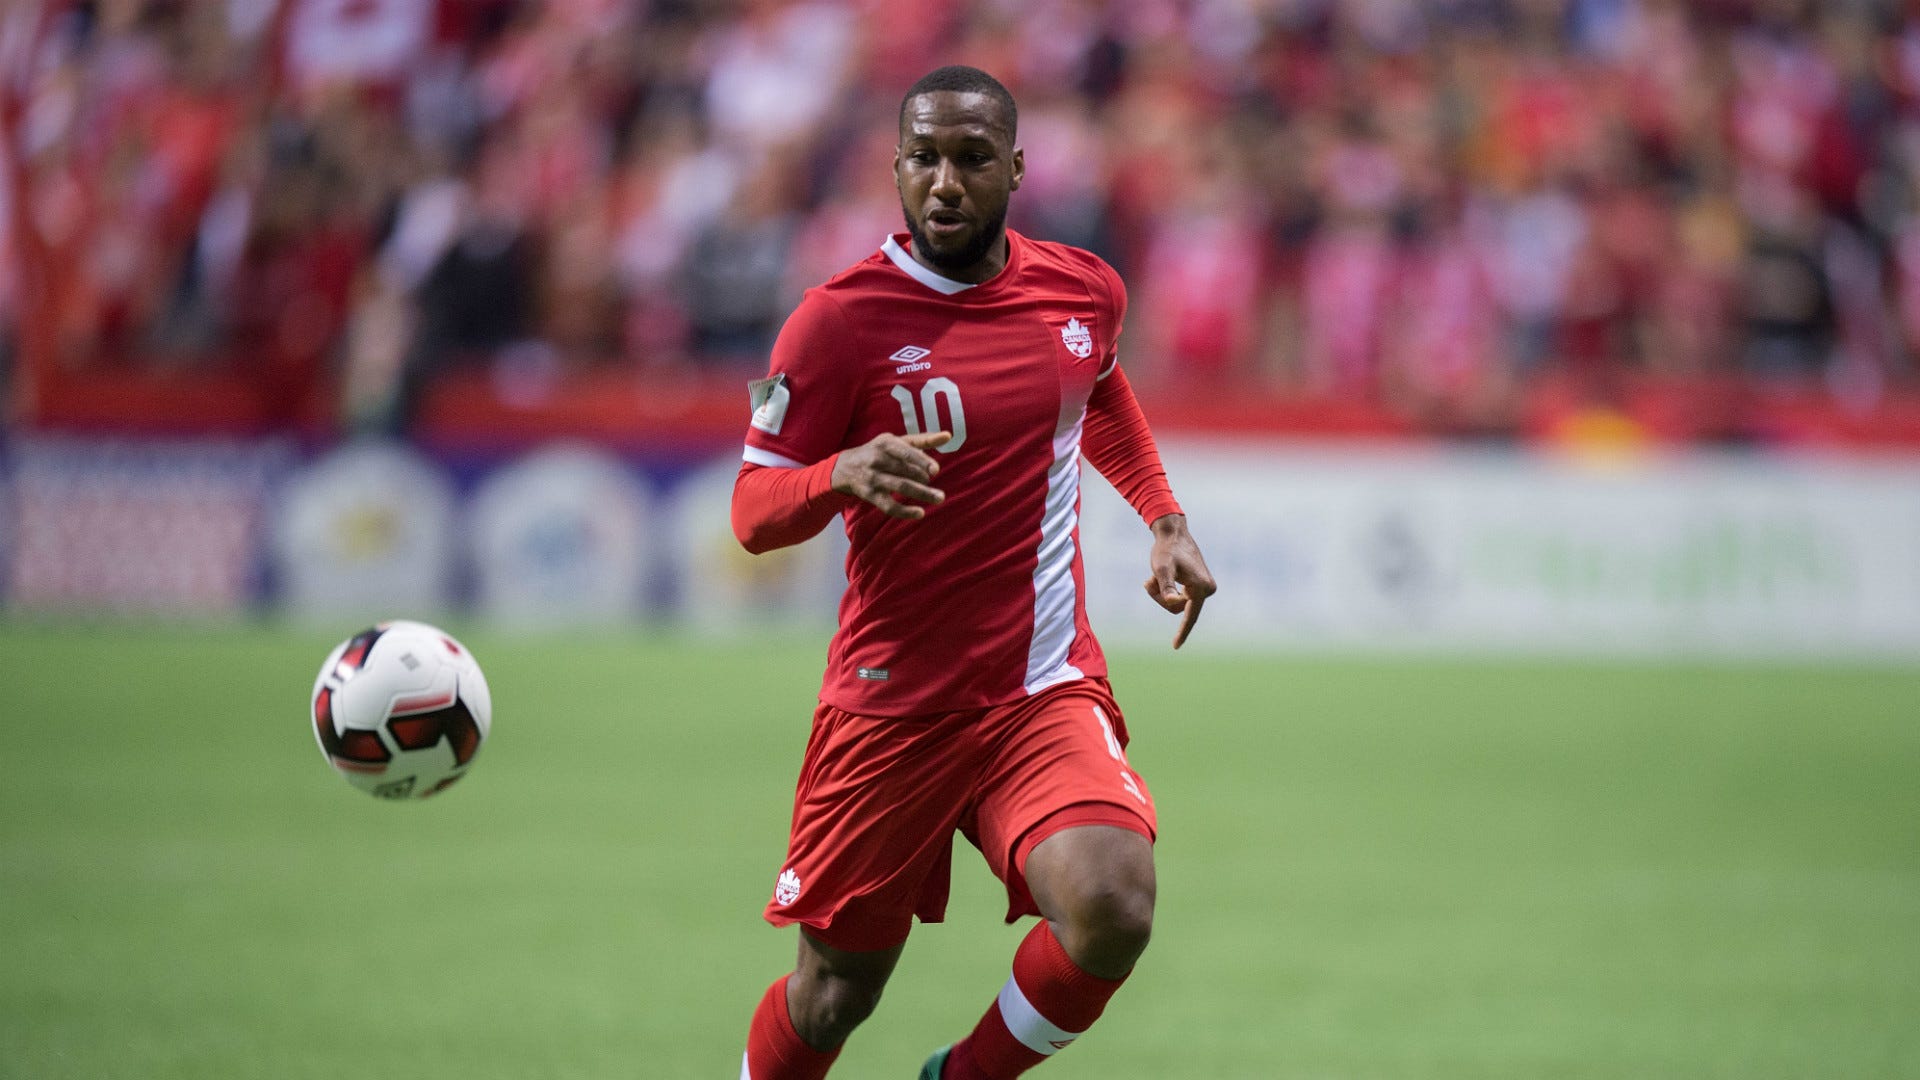 Who is the leading all-time top goal scorer for Canada? Larin